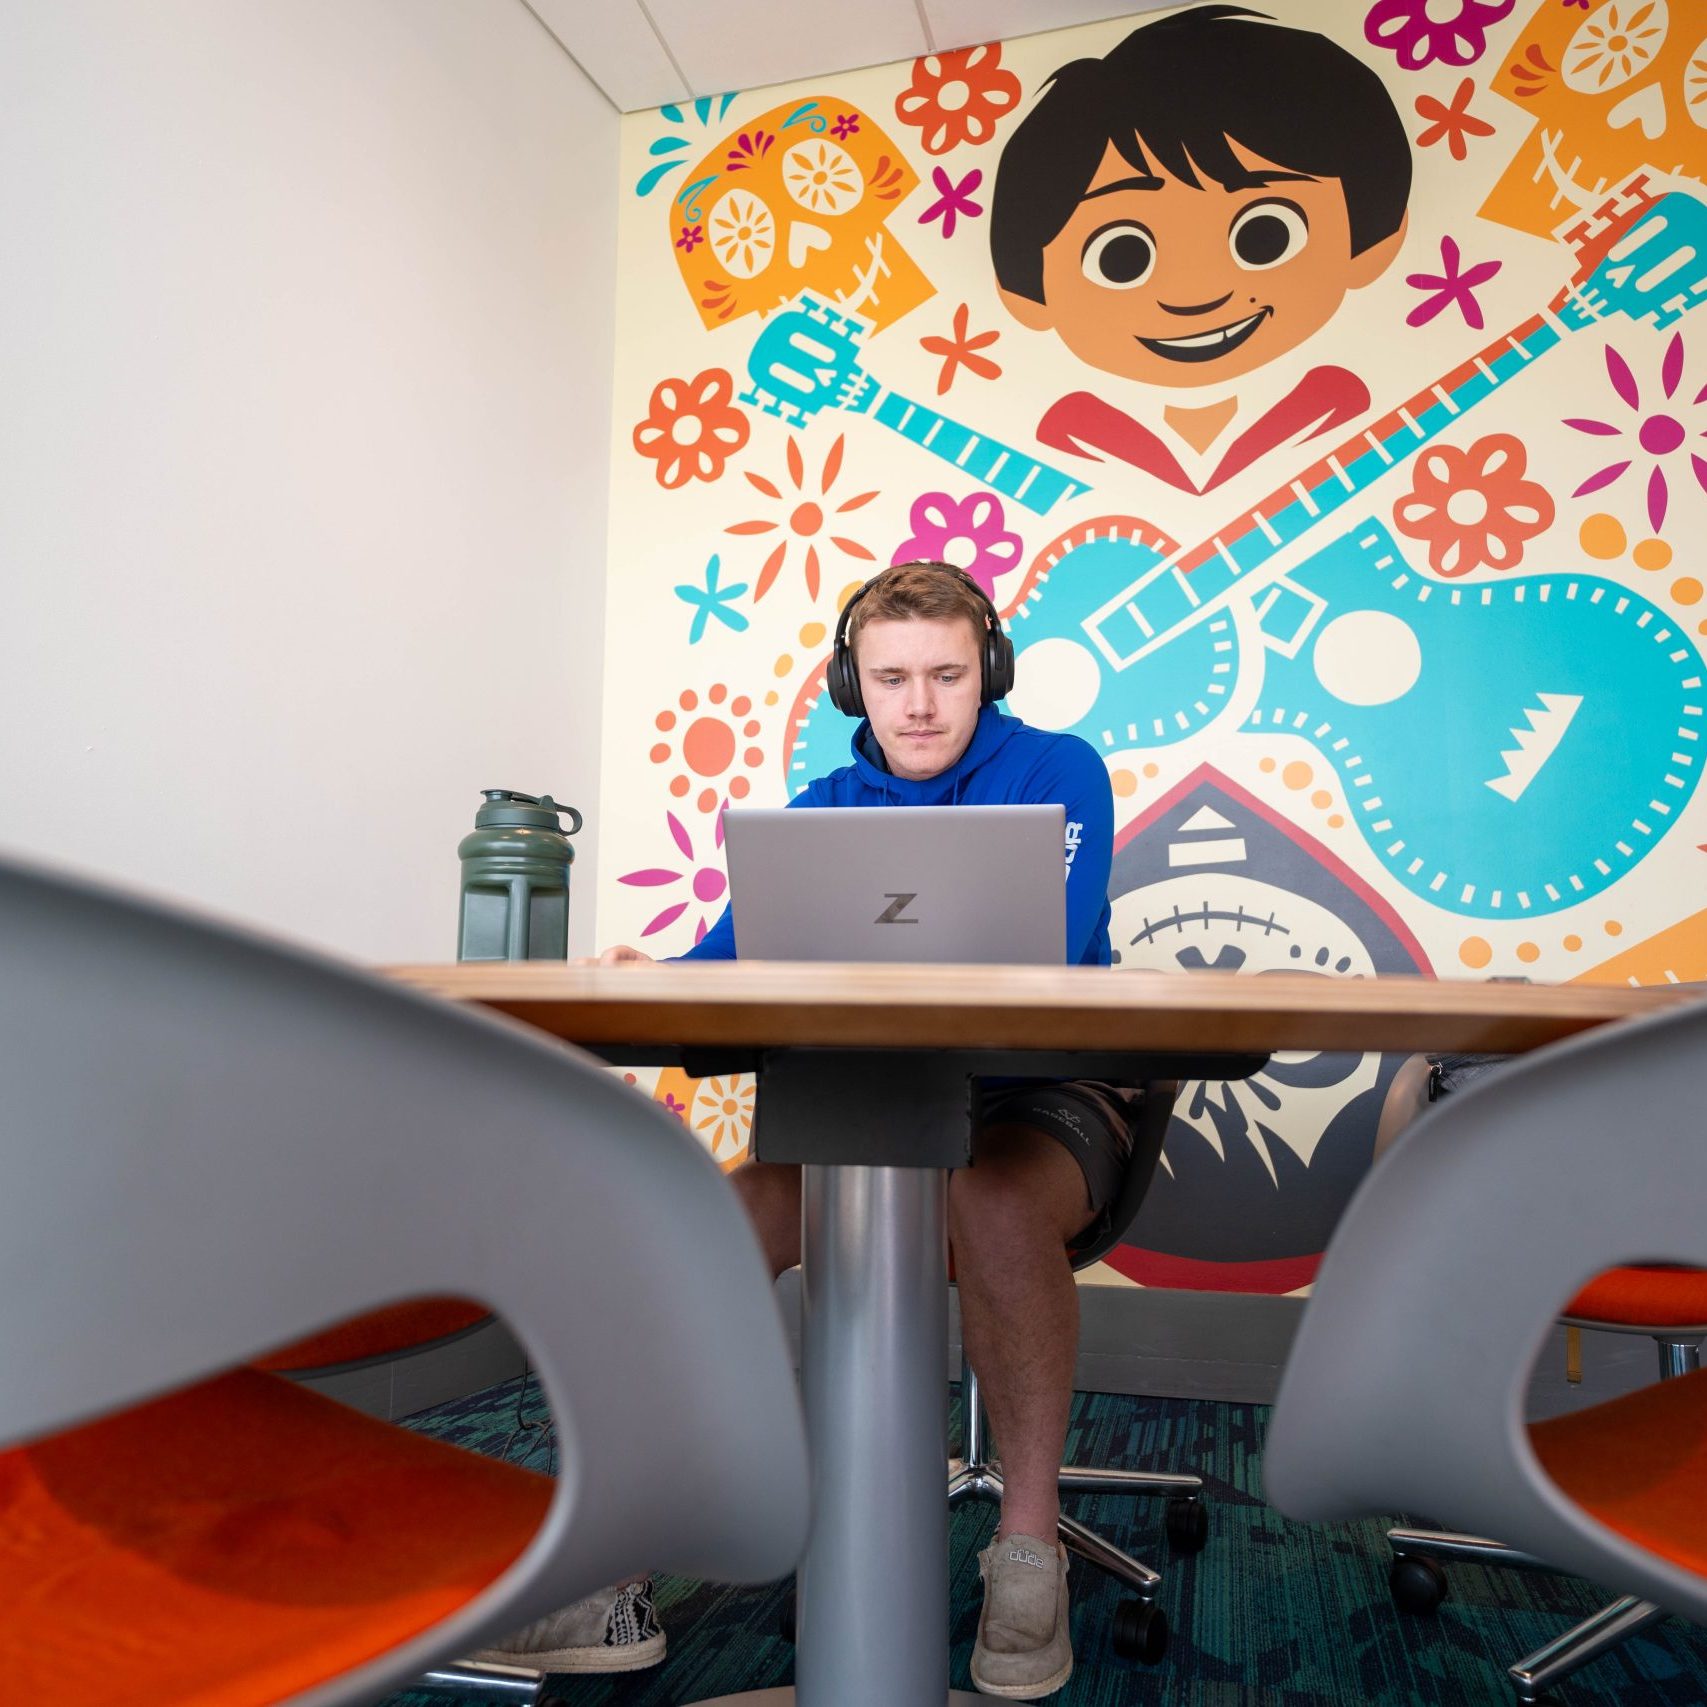 A colorful wall mural featuring Miguel from Coco provides a backdrop for a young male working at a laptop in an table in an innovation nook.